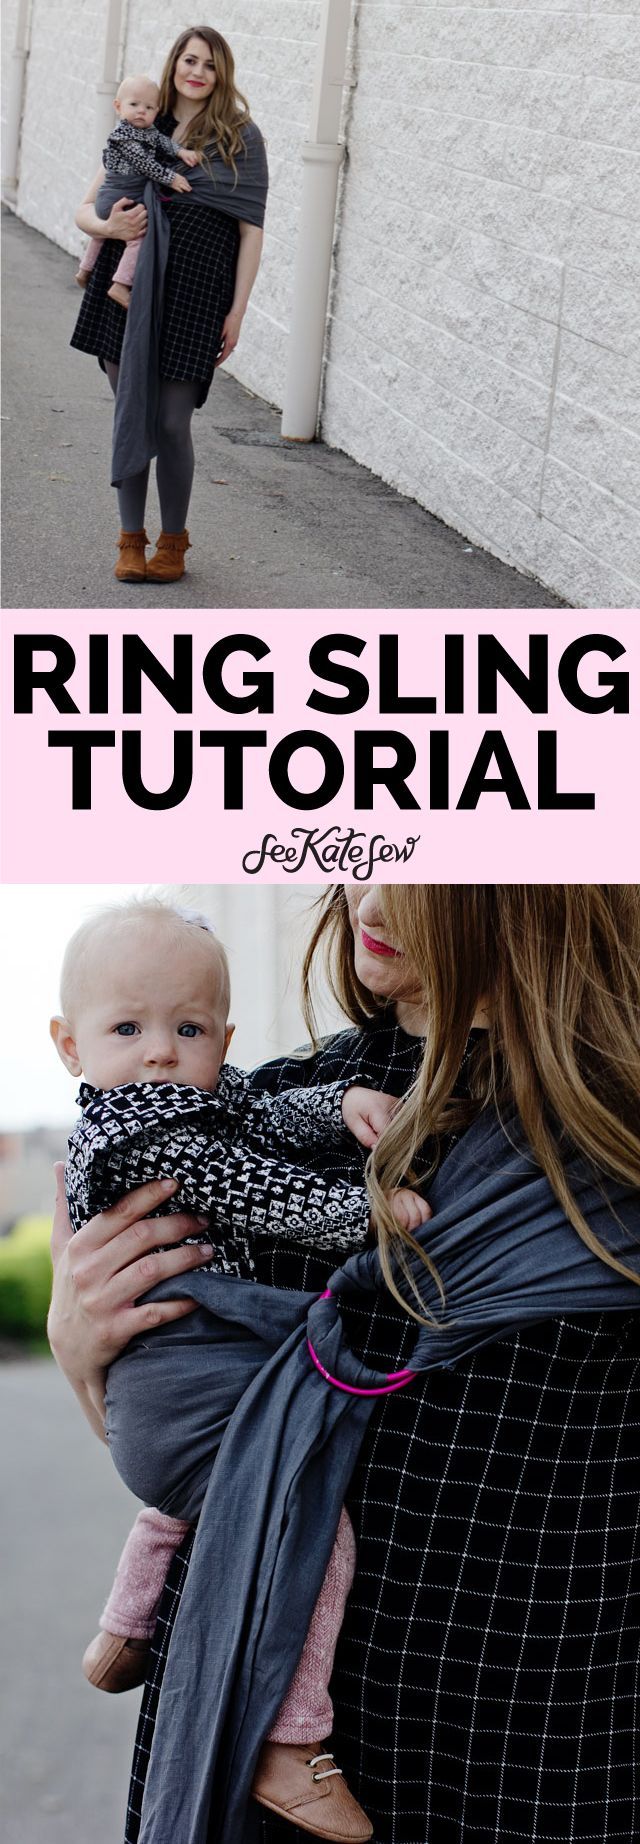 How to Make a Ring Sling Carrier for Baby - see kate sew -   21 diy Baby sling ideas